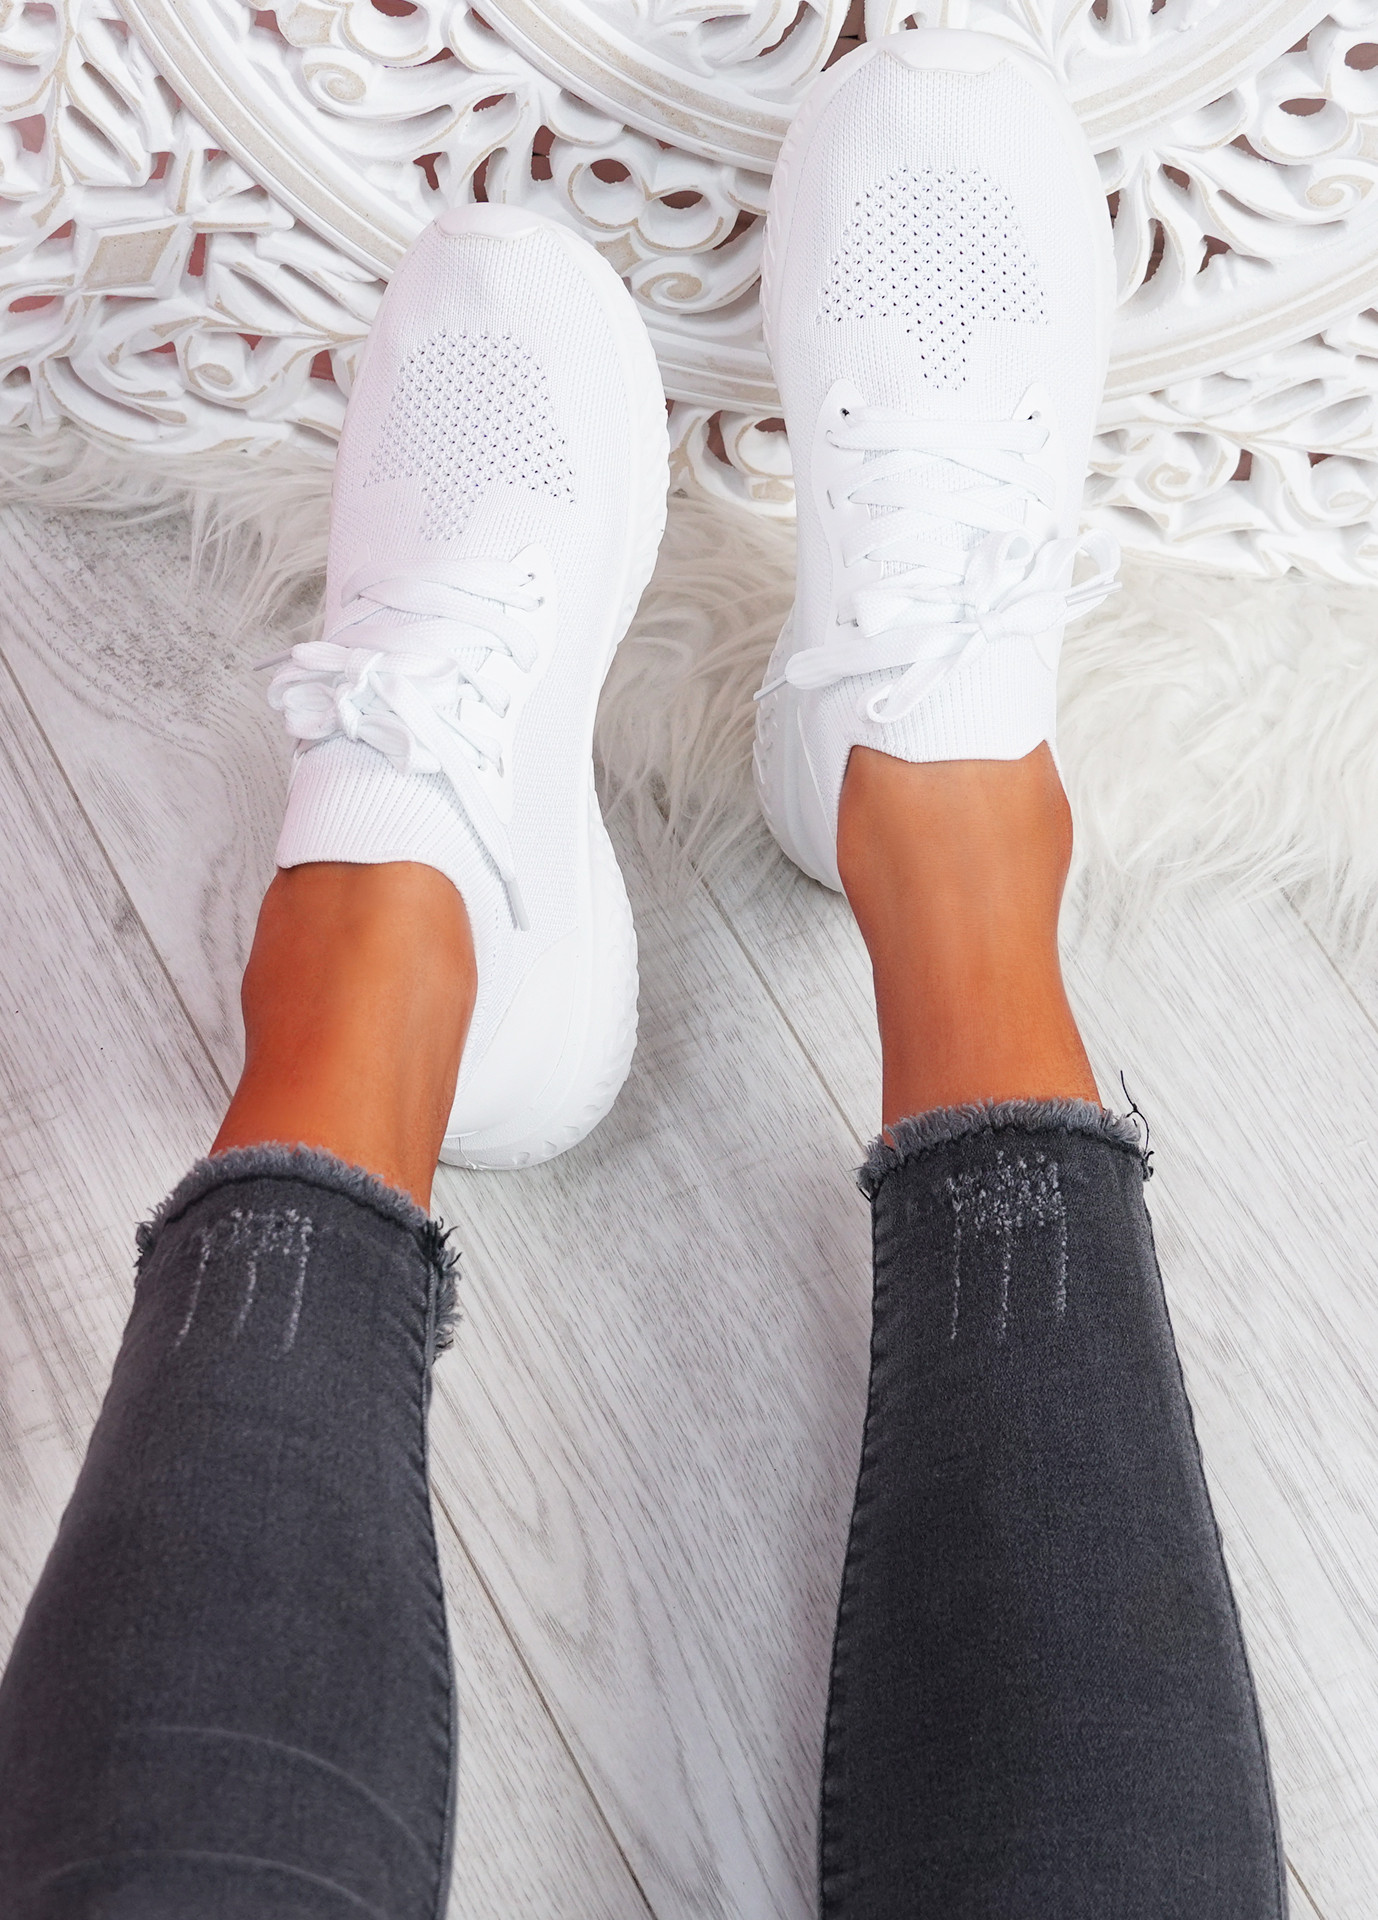 Mimmy White Knit Sport Trainers